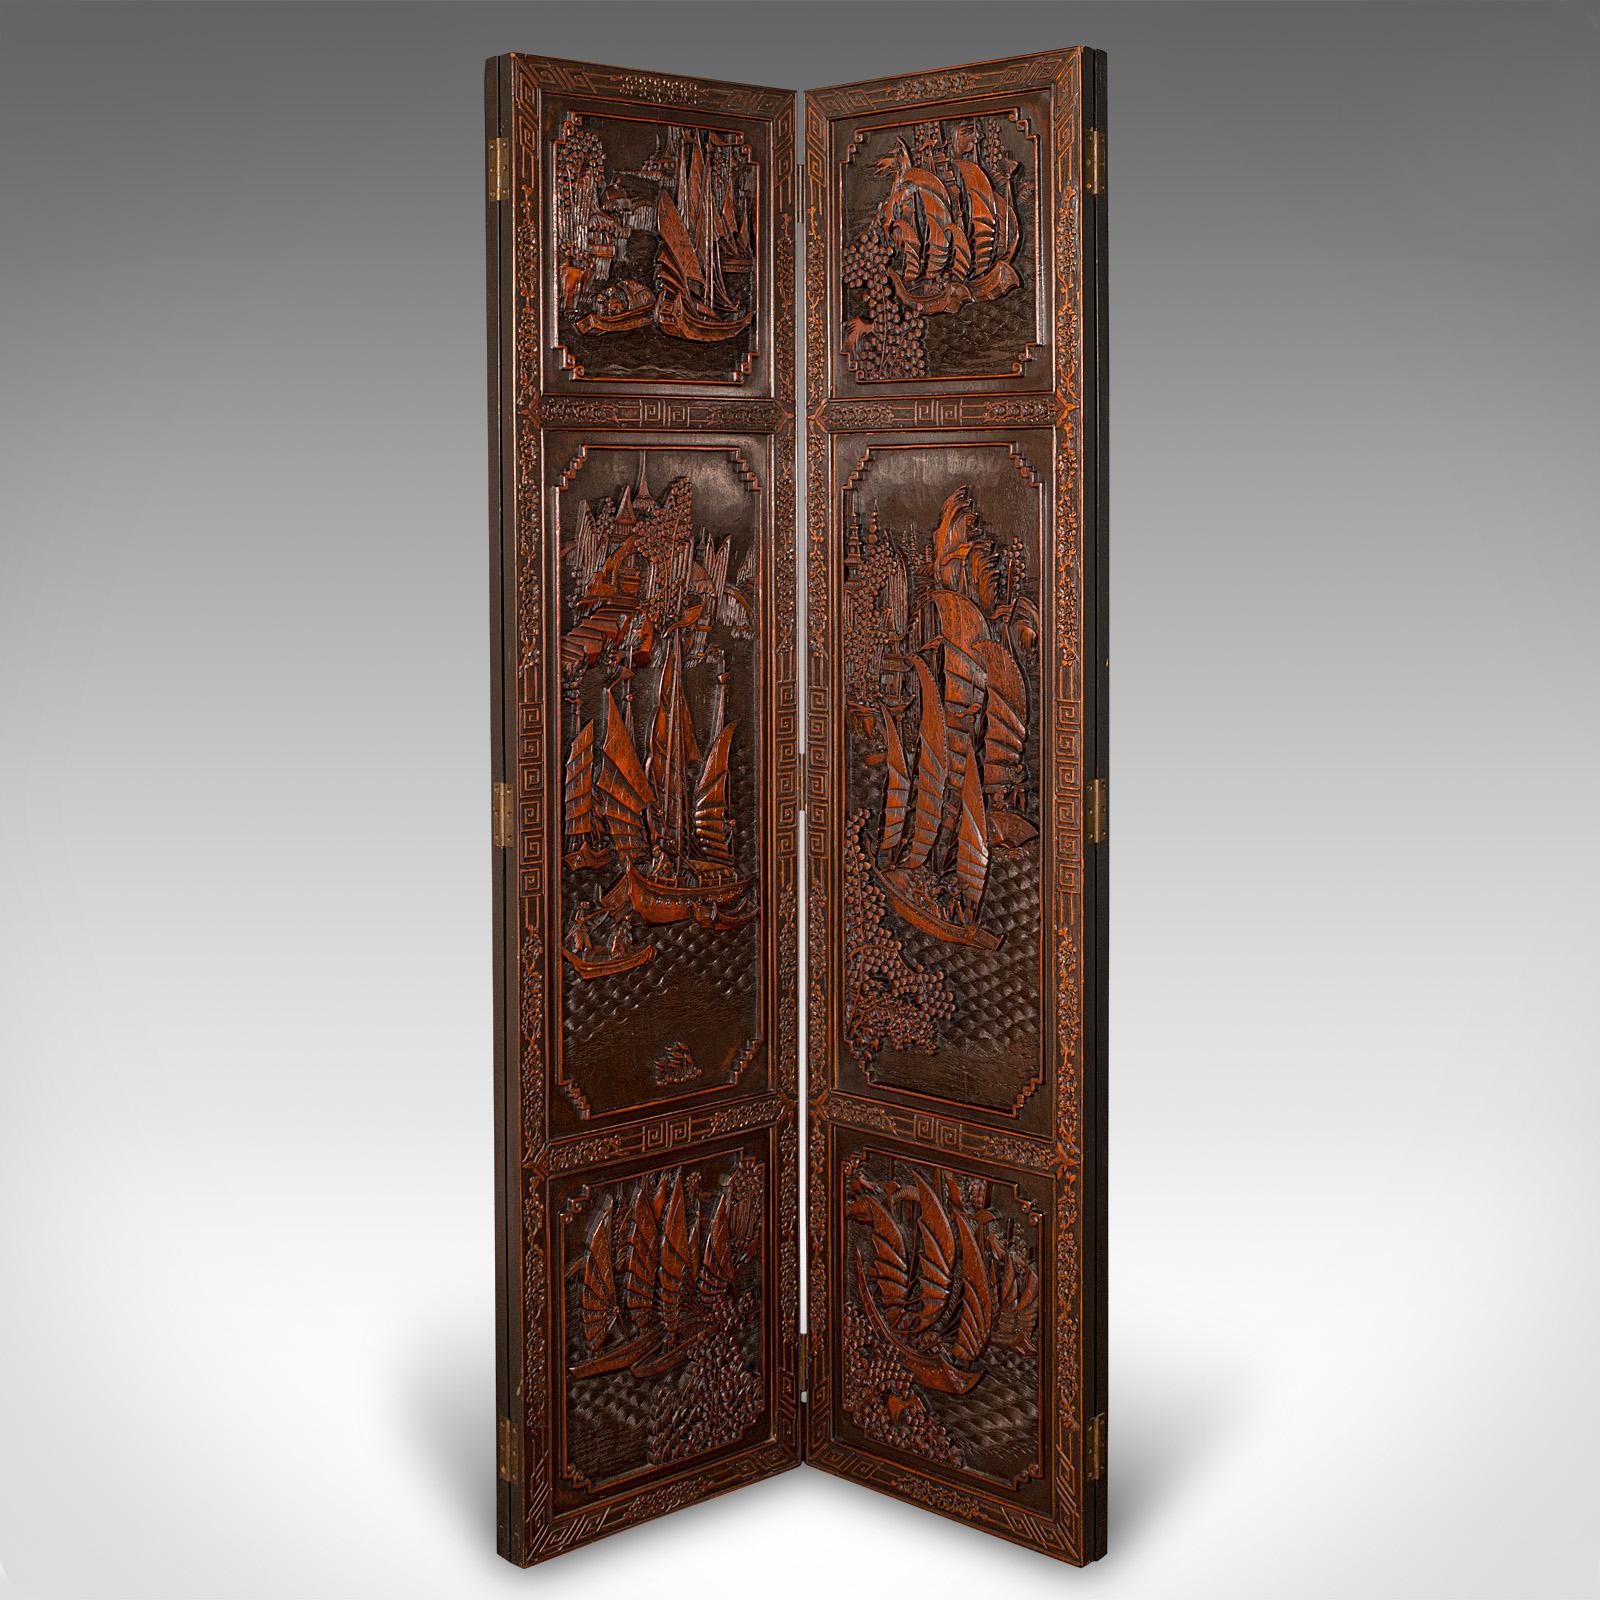 Chinese Export Heavy Vintage Privacy Screen, Chinese, Carved, 4 Fold, Room Divider, Art Deco